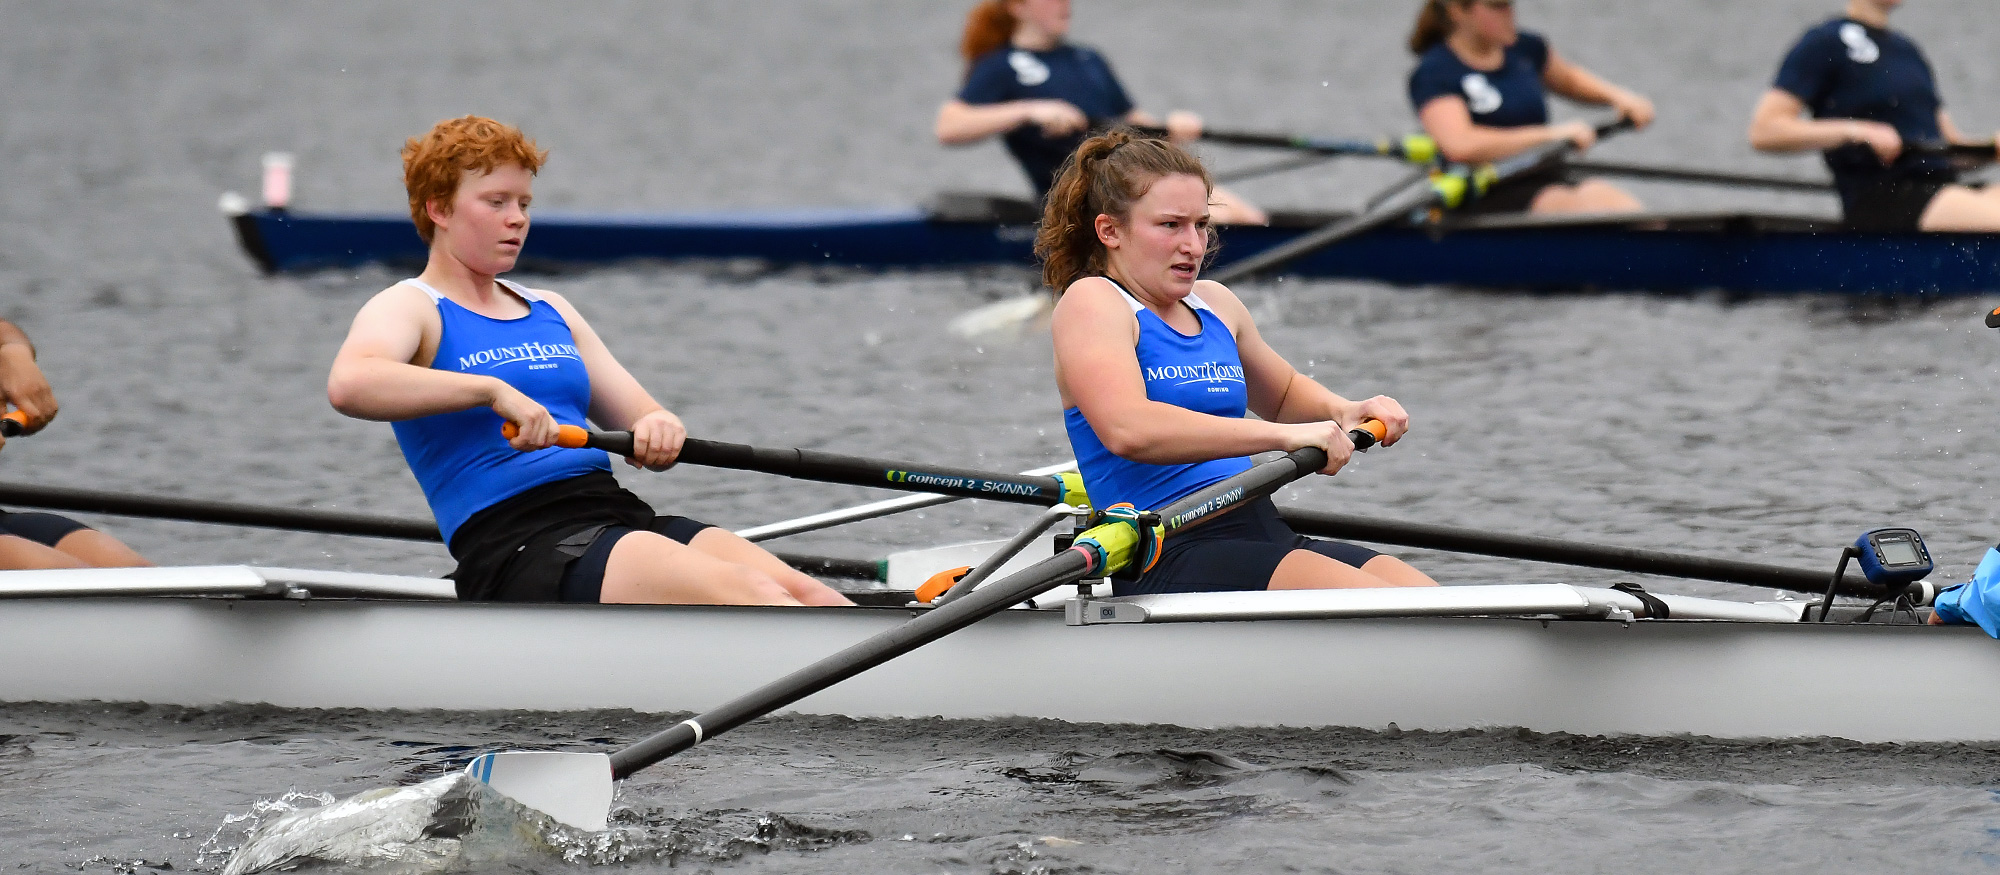 Emma Waldron (left) and Celeste Keep (right) helped Mount Holyoke's first varsity eight finish 11th out of 31 boats at the Head of the Riverfront regatta in Hartford, Conn., on Oct. 2, 2022. (RJB Sports file photo)